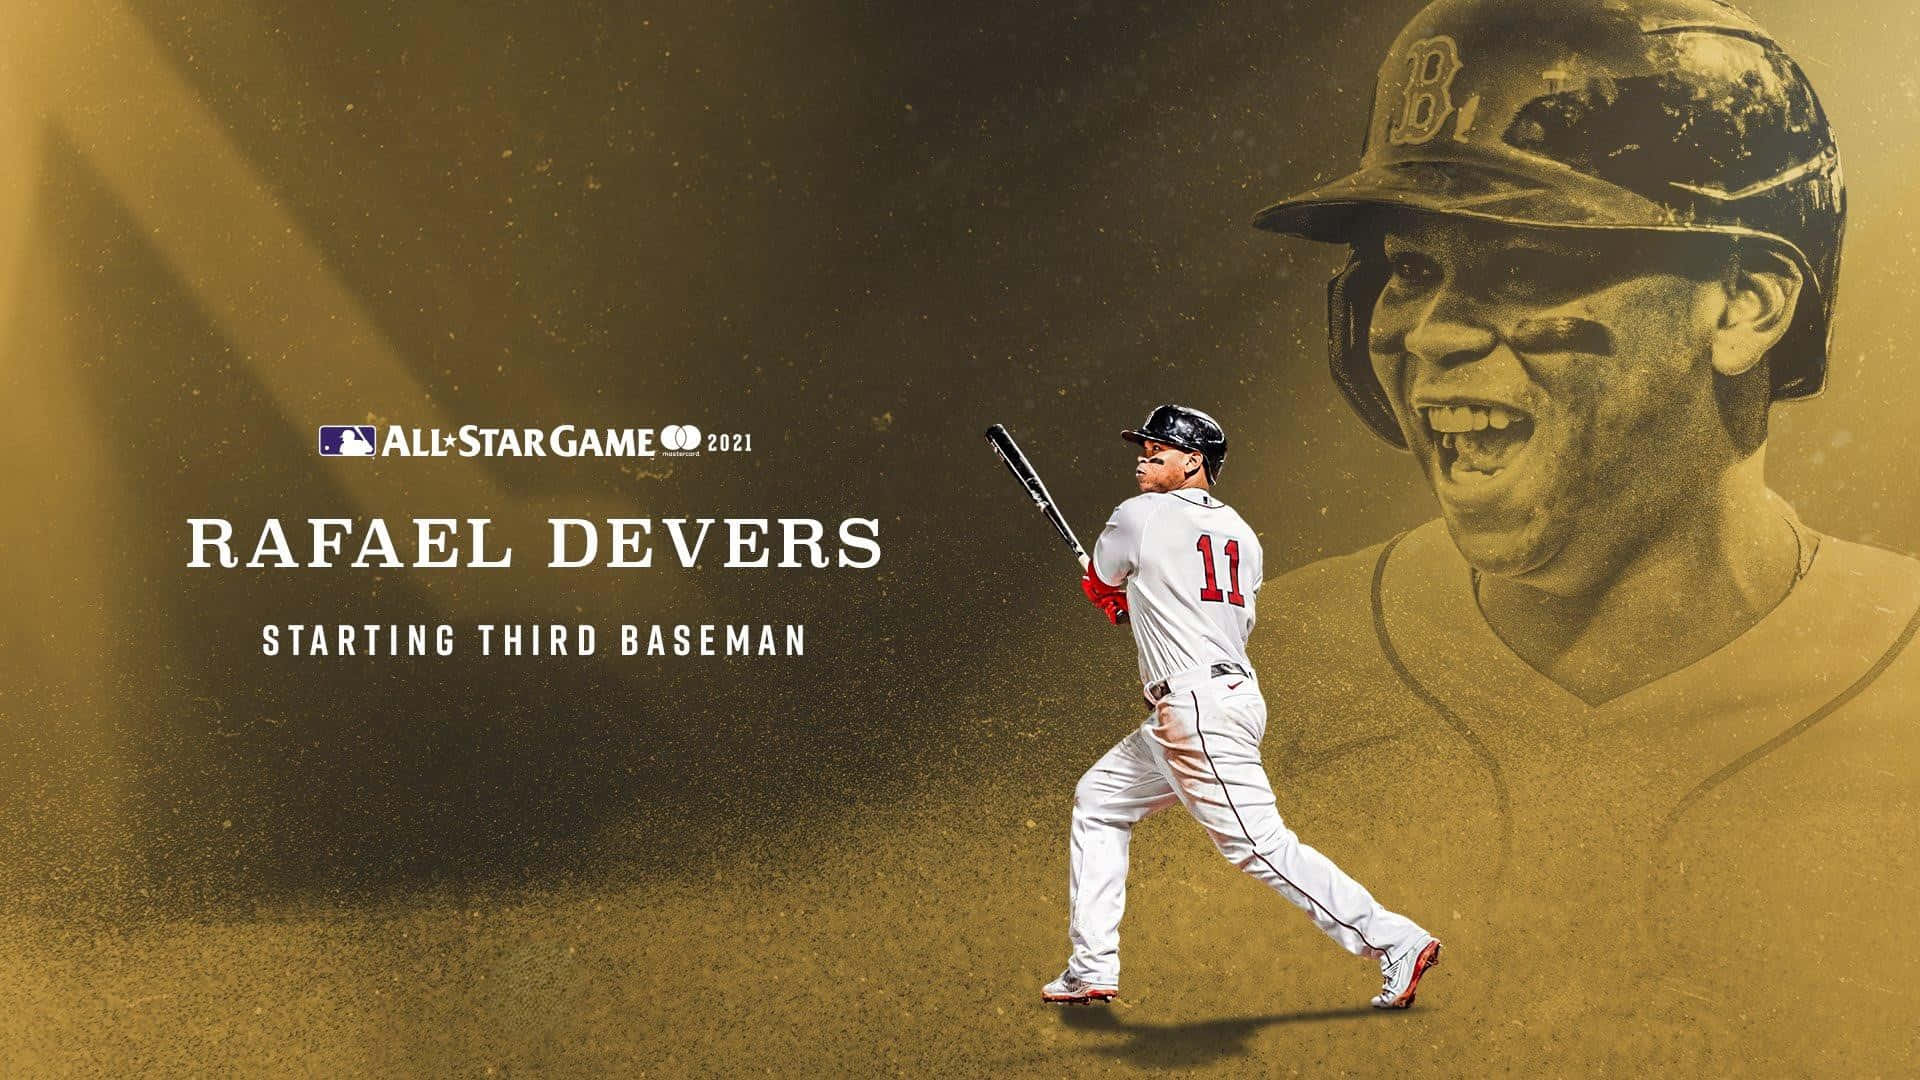 Rafael Devers All Star Game2021 Promotional Graphic Wallpaper